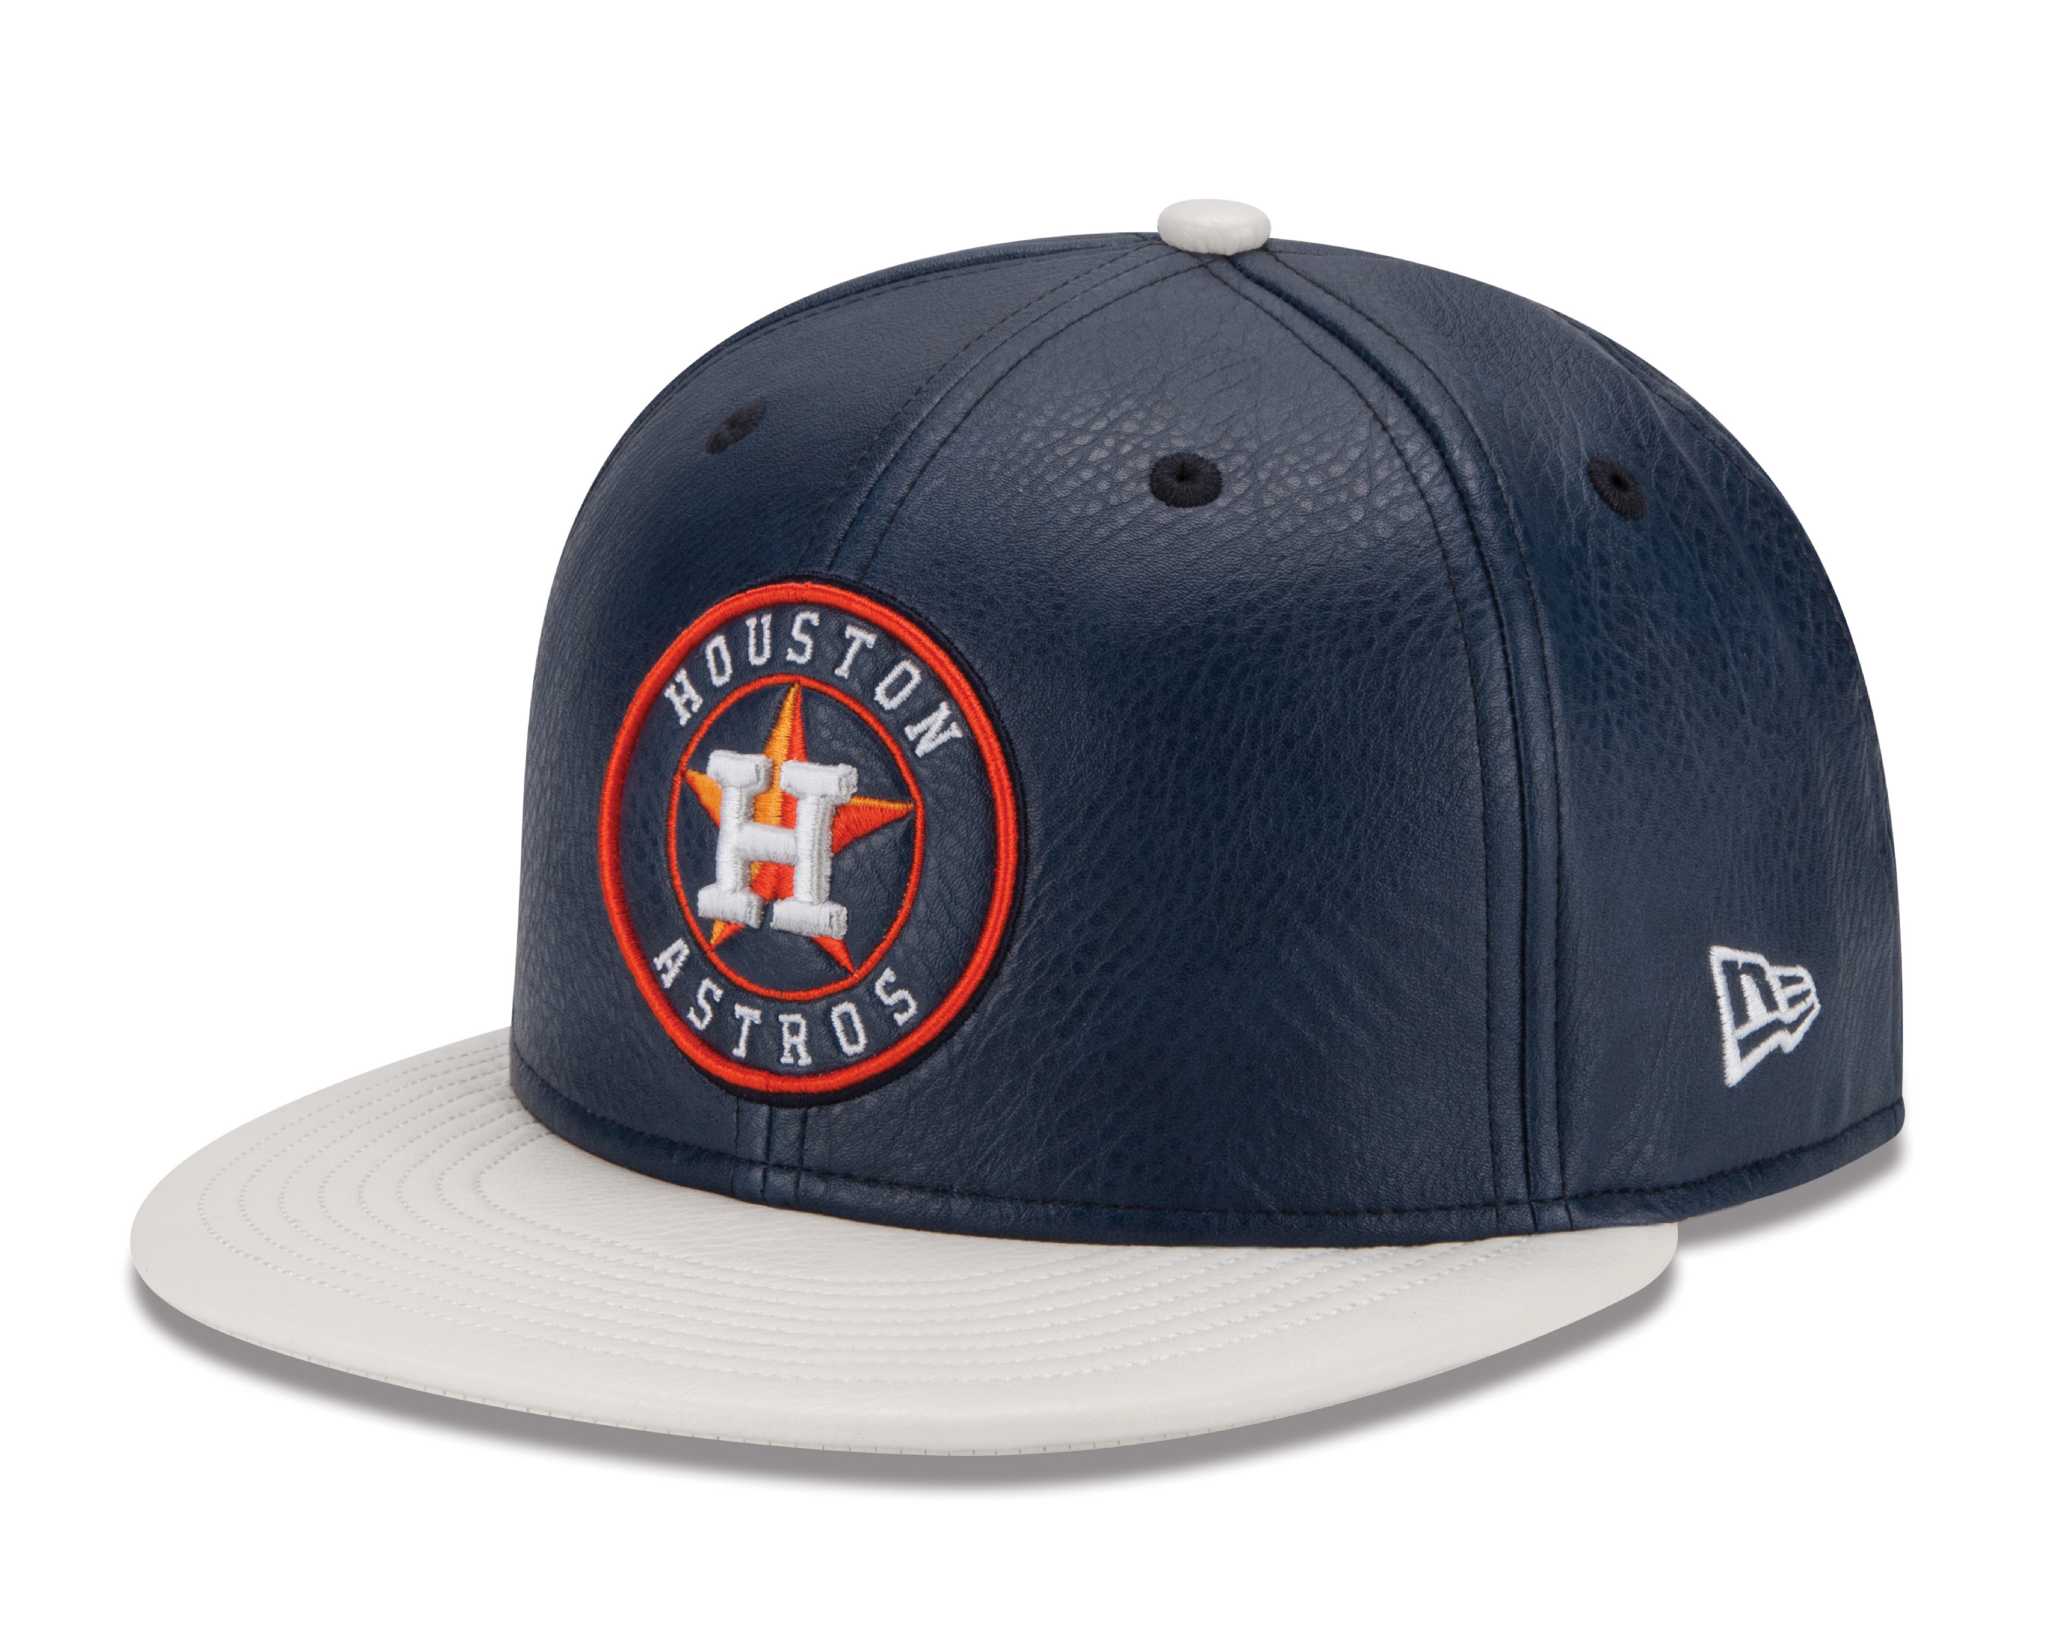 LIVE NOW: Bun B to meet with Astros fans ahead of hat release